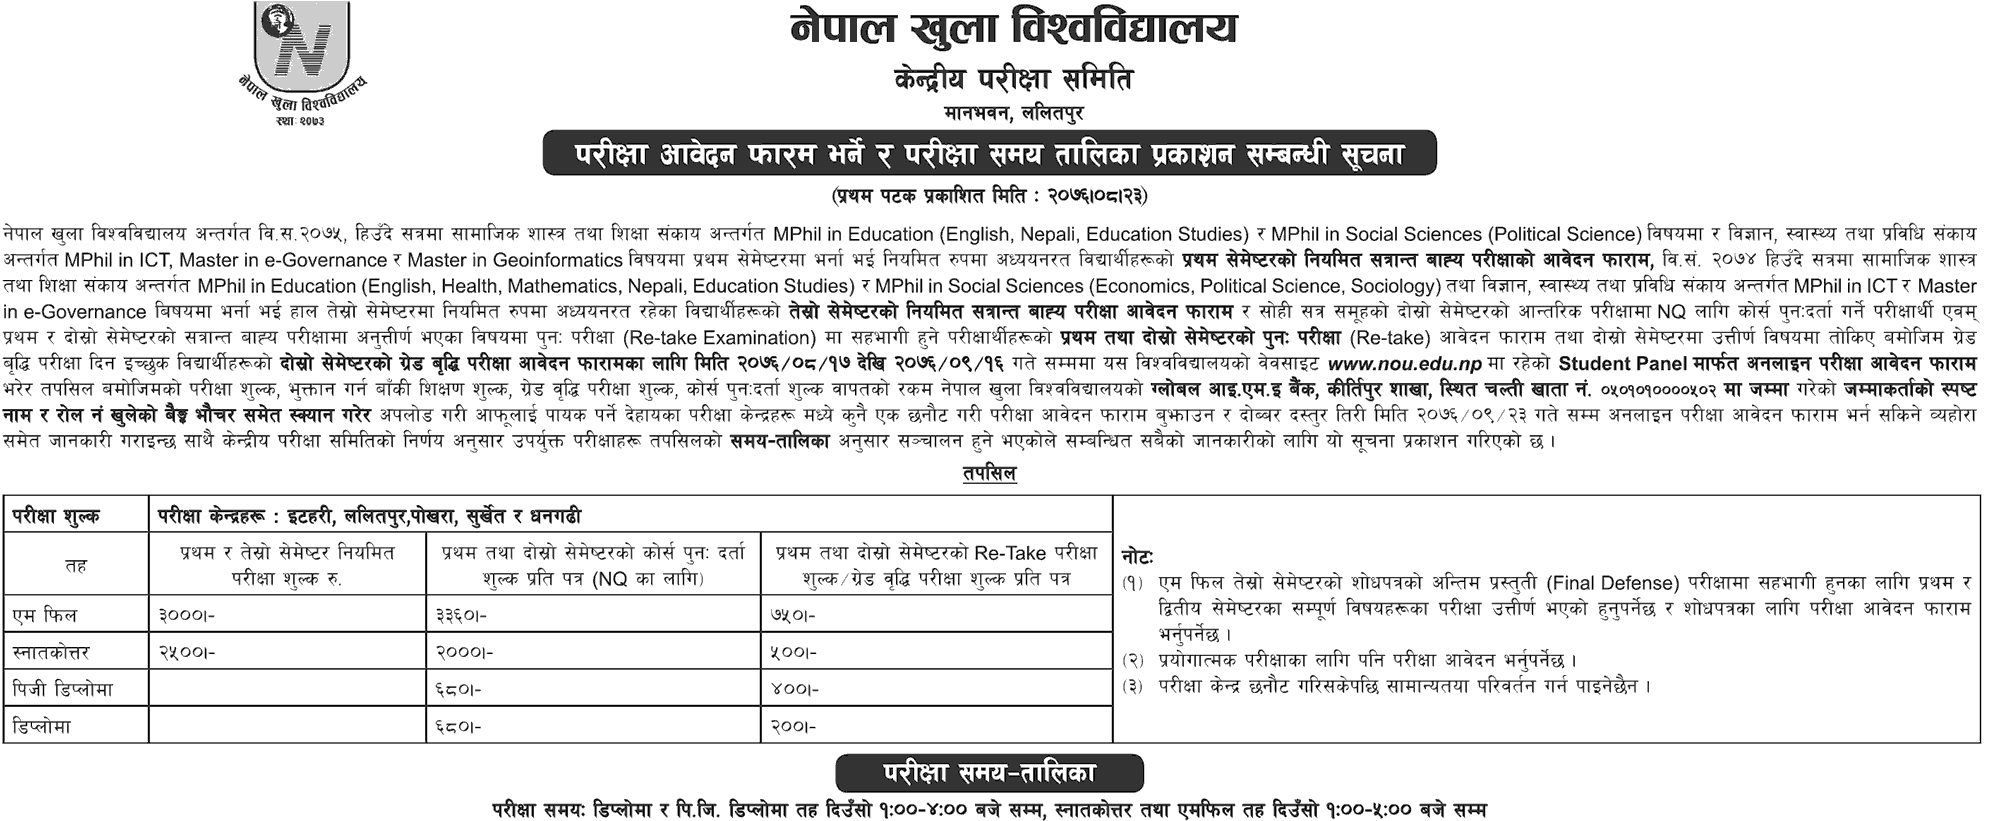 Nepal Open University Exam Form Submission and Exam Schedule